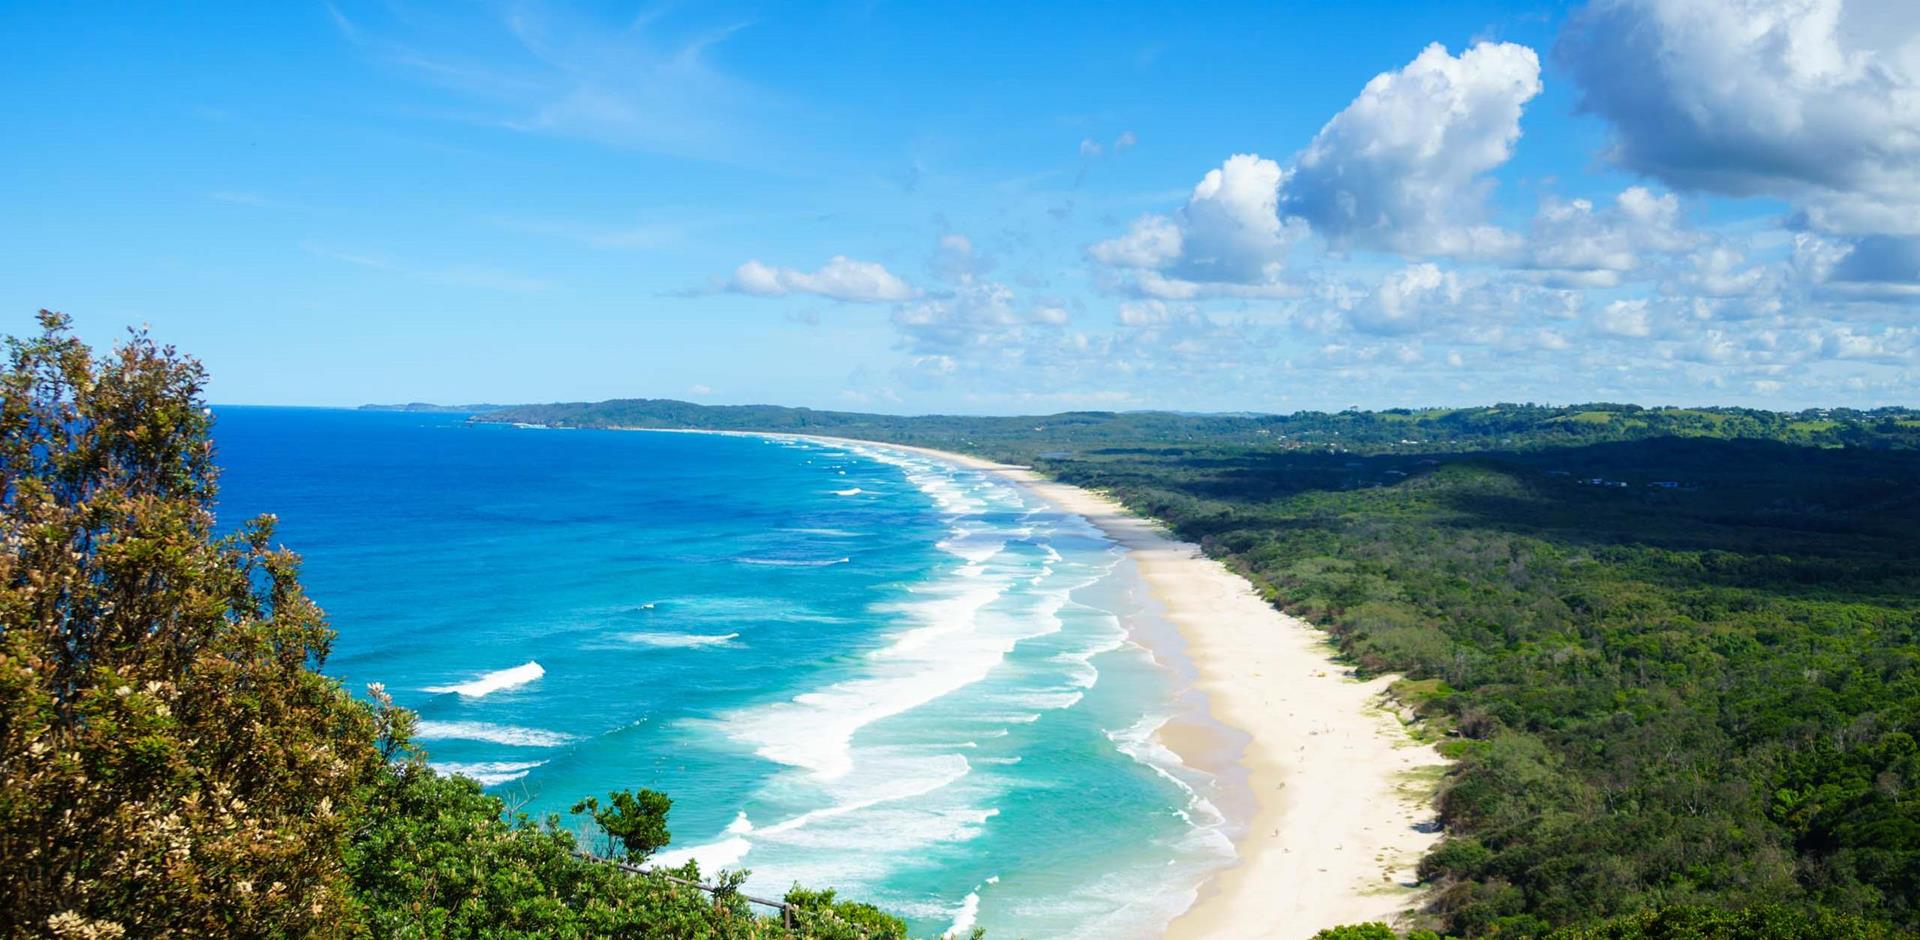 Book your luxury holiday to Byron Bay, Australia with Abercrombie & Kent